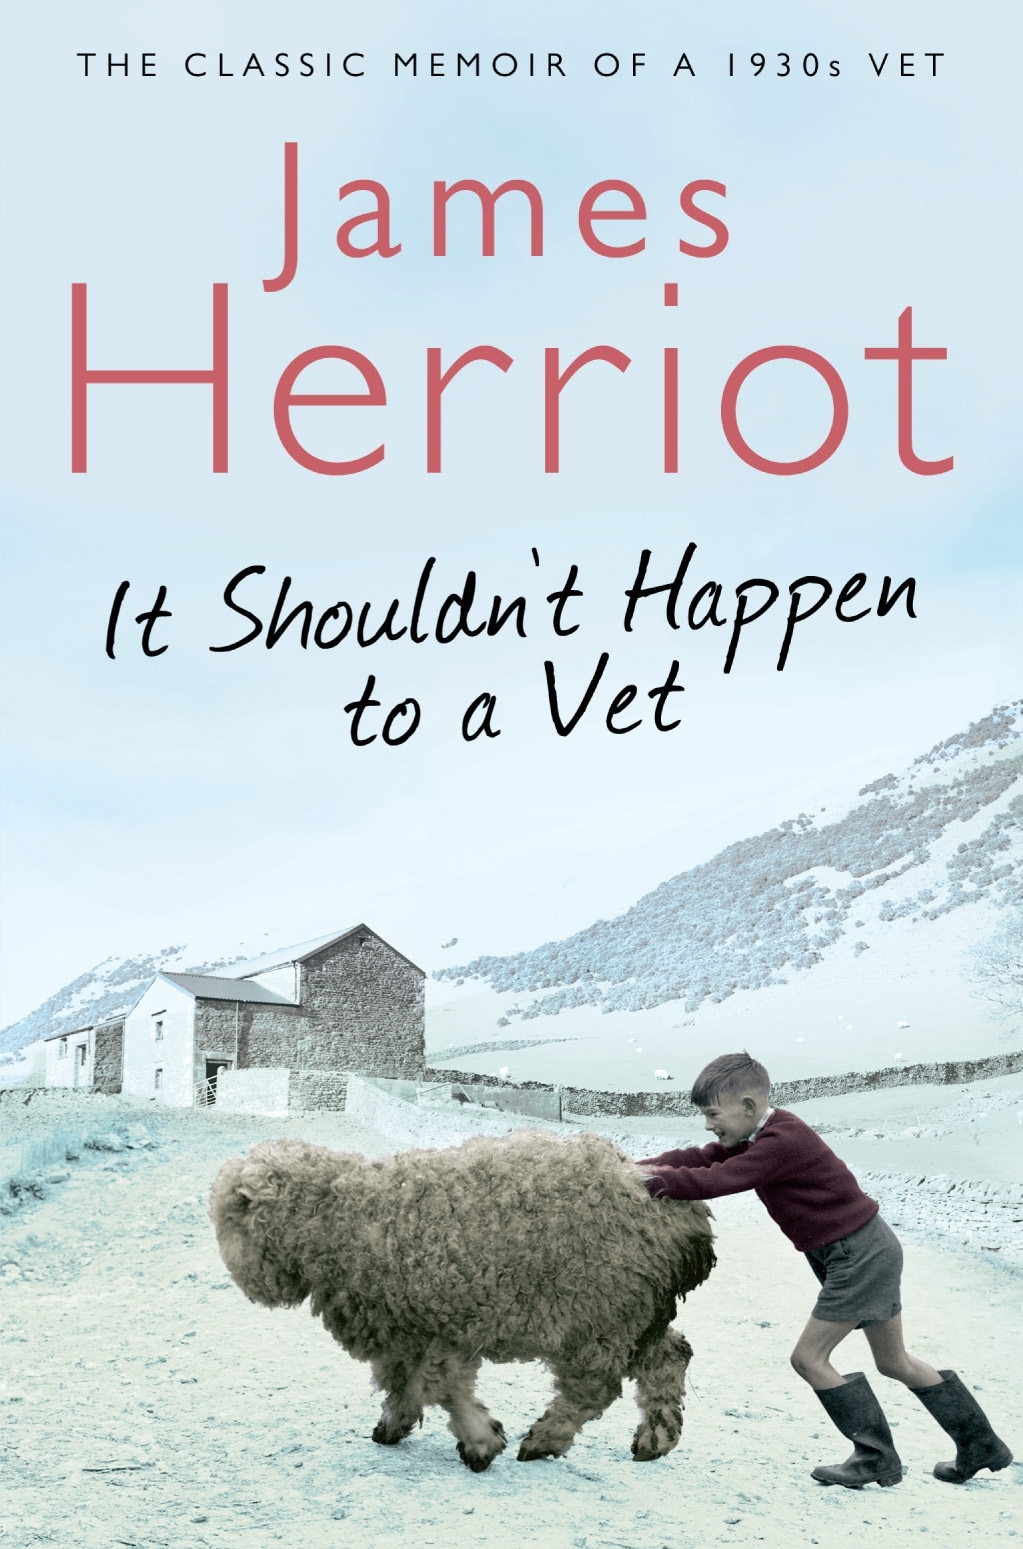 James Herriot Front cover of his book